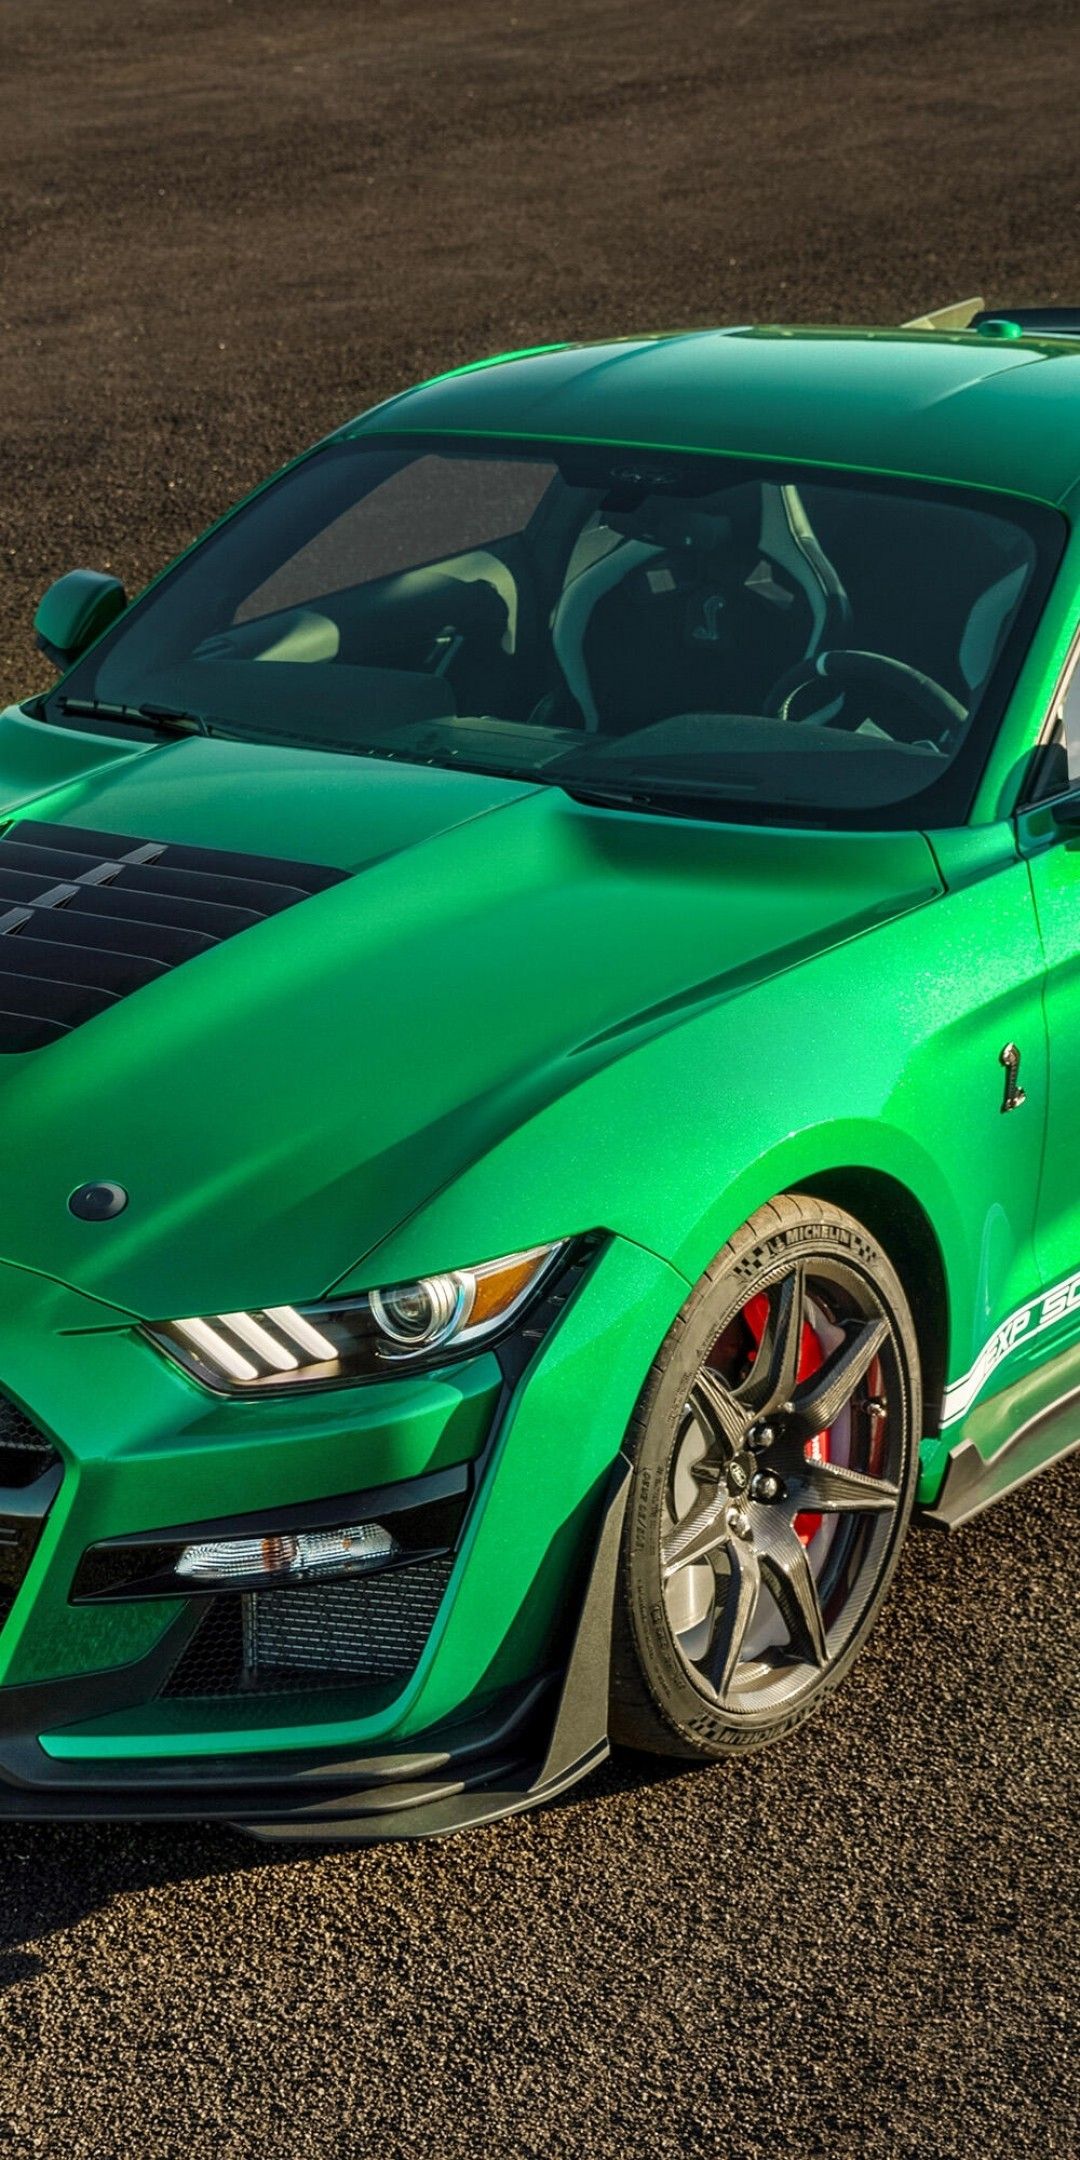 Download 1080x2160 Ford Mustang Shelby Gt Green Muscle Cars Wallpaper for Huawei Mate 10